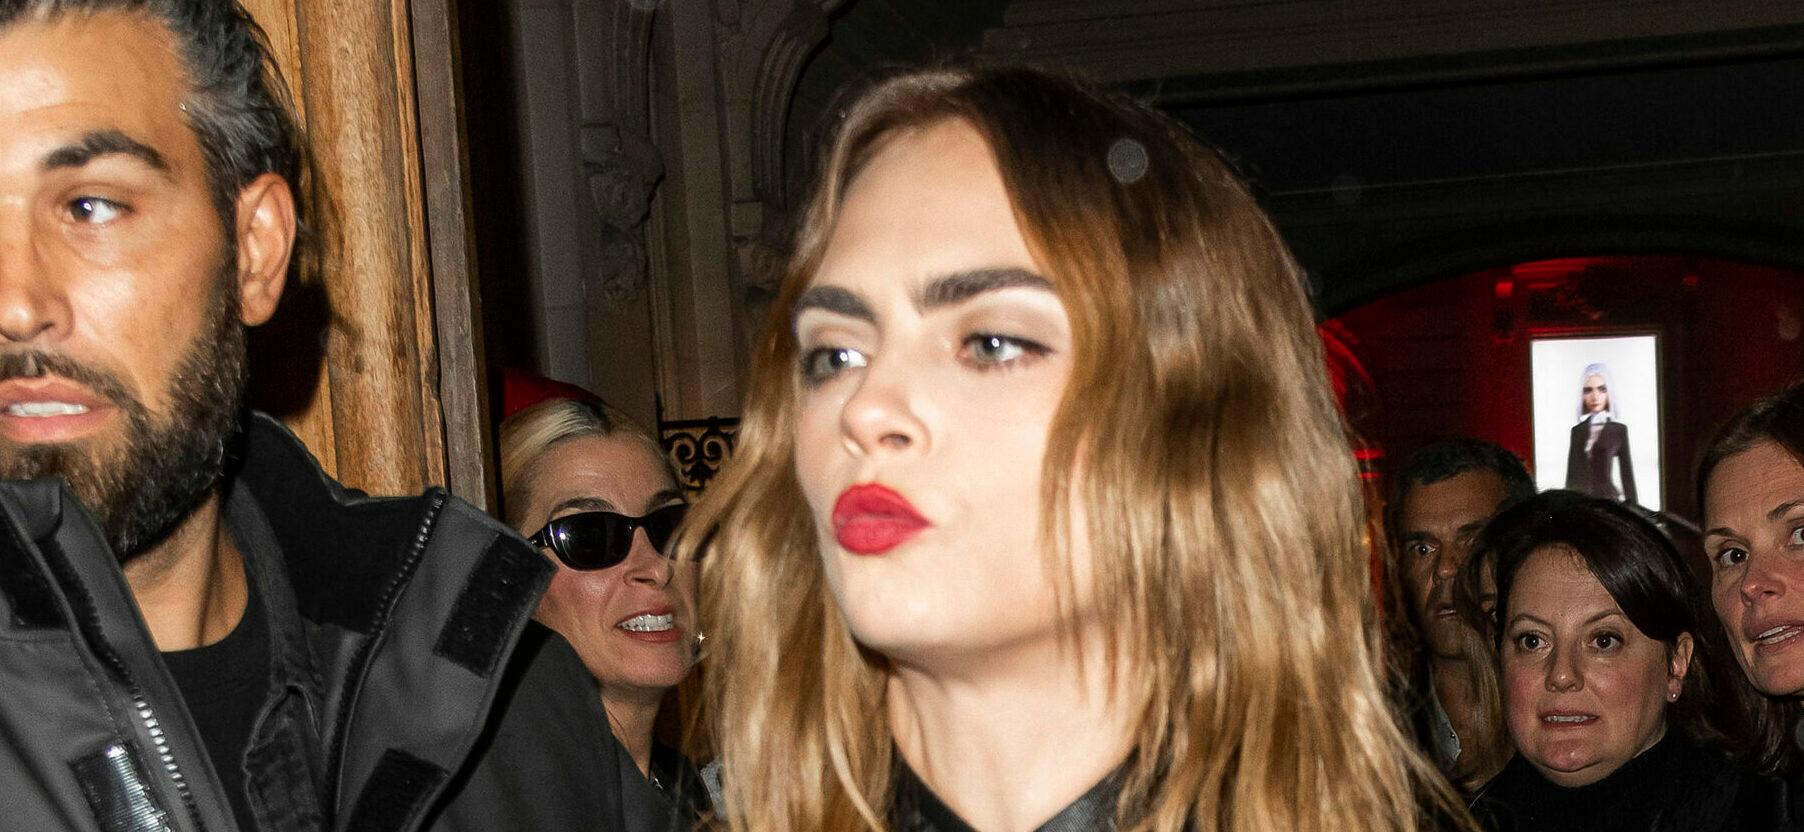 Cara Delevingne Proves To Be The Queen Of Lip Syncing In Hilarious Clip